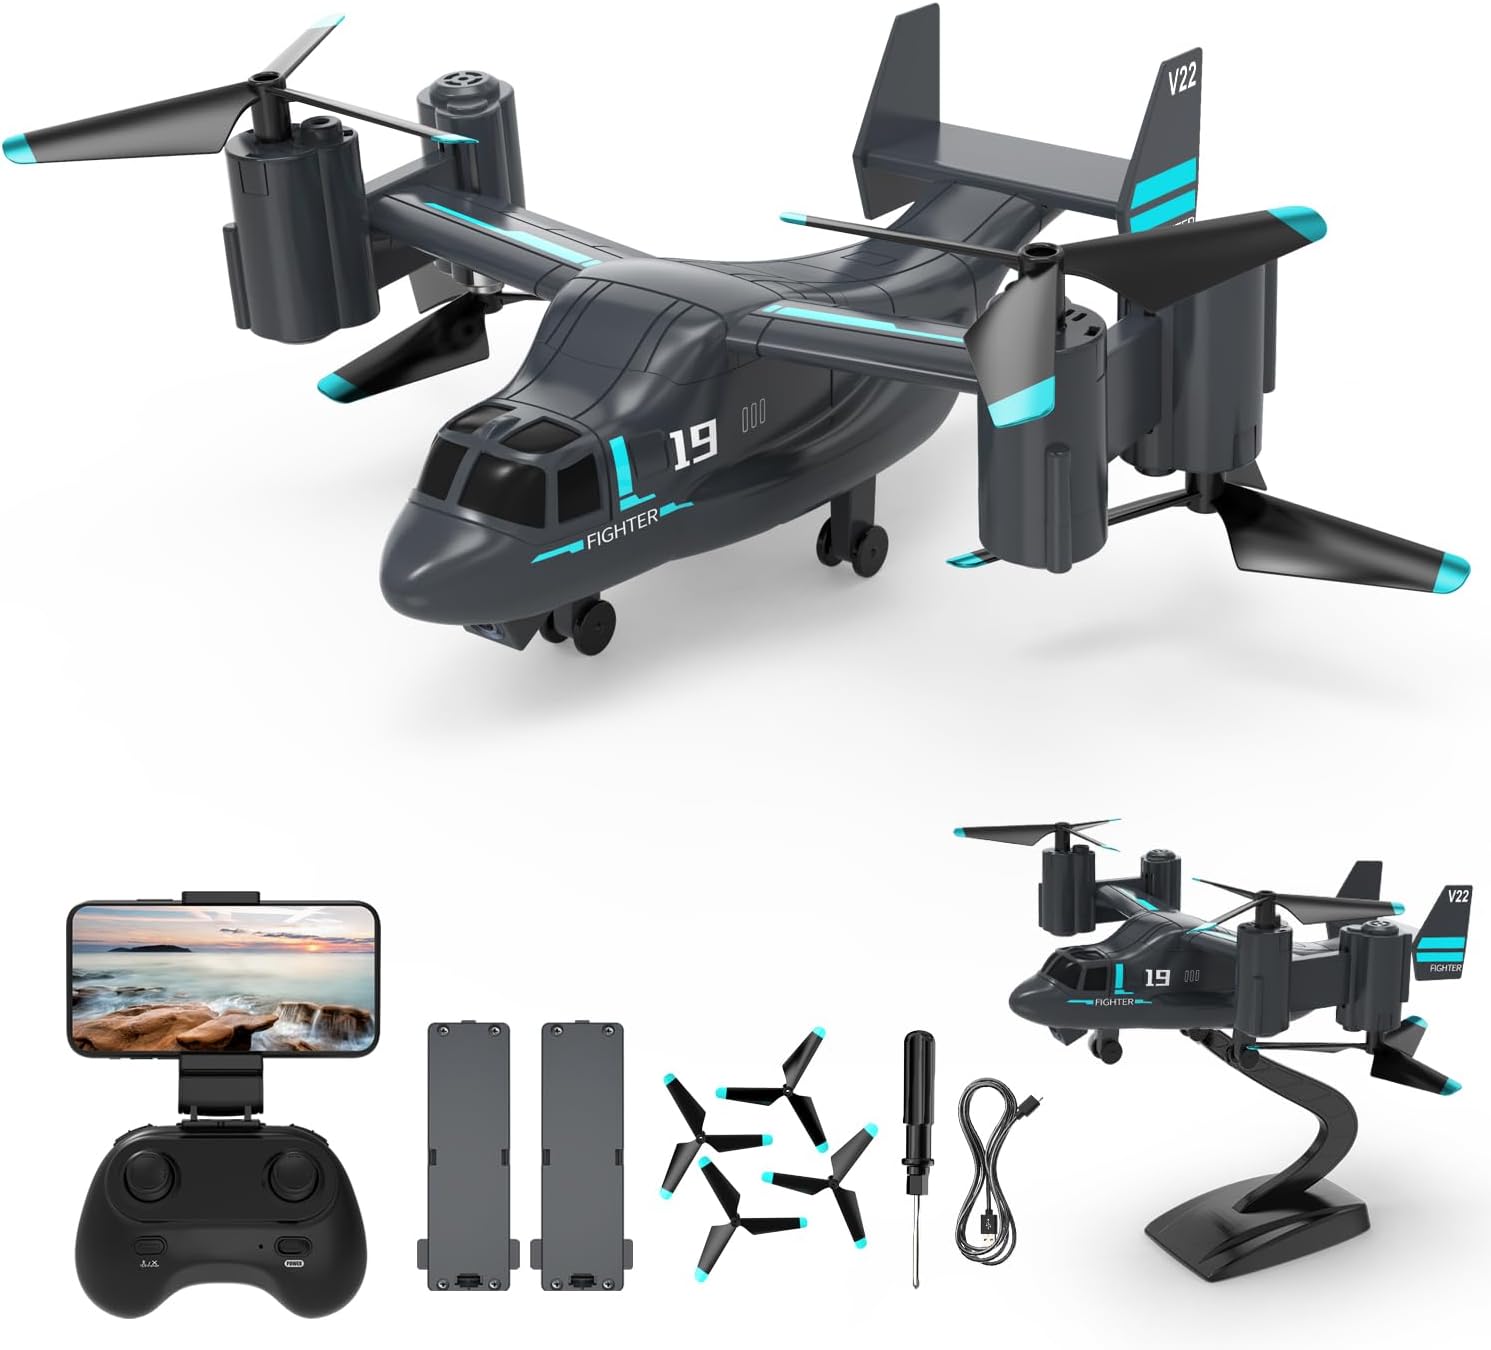 LMRC LM19 Remote Control Airplane with HD Camera for Adults and Kids, V-22 Osprey RC Plane, Easy & Ready to Fly Rc Drone, RC Quadcopter Drones, WiFi Live Video, 2 Modular Batteries